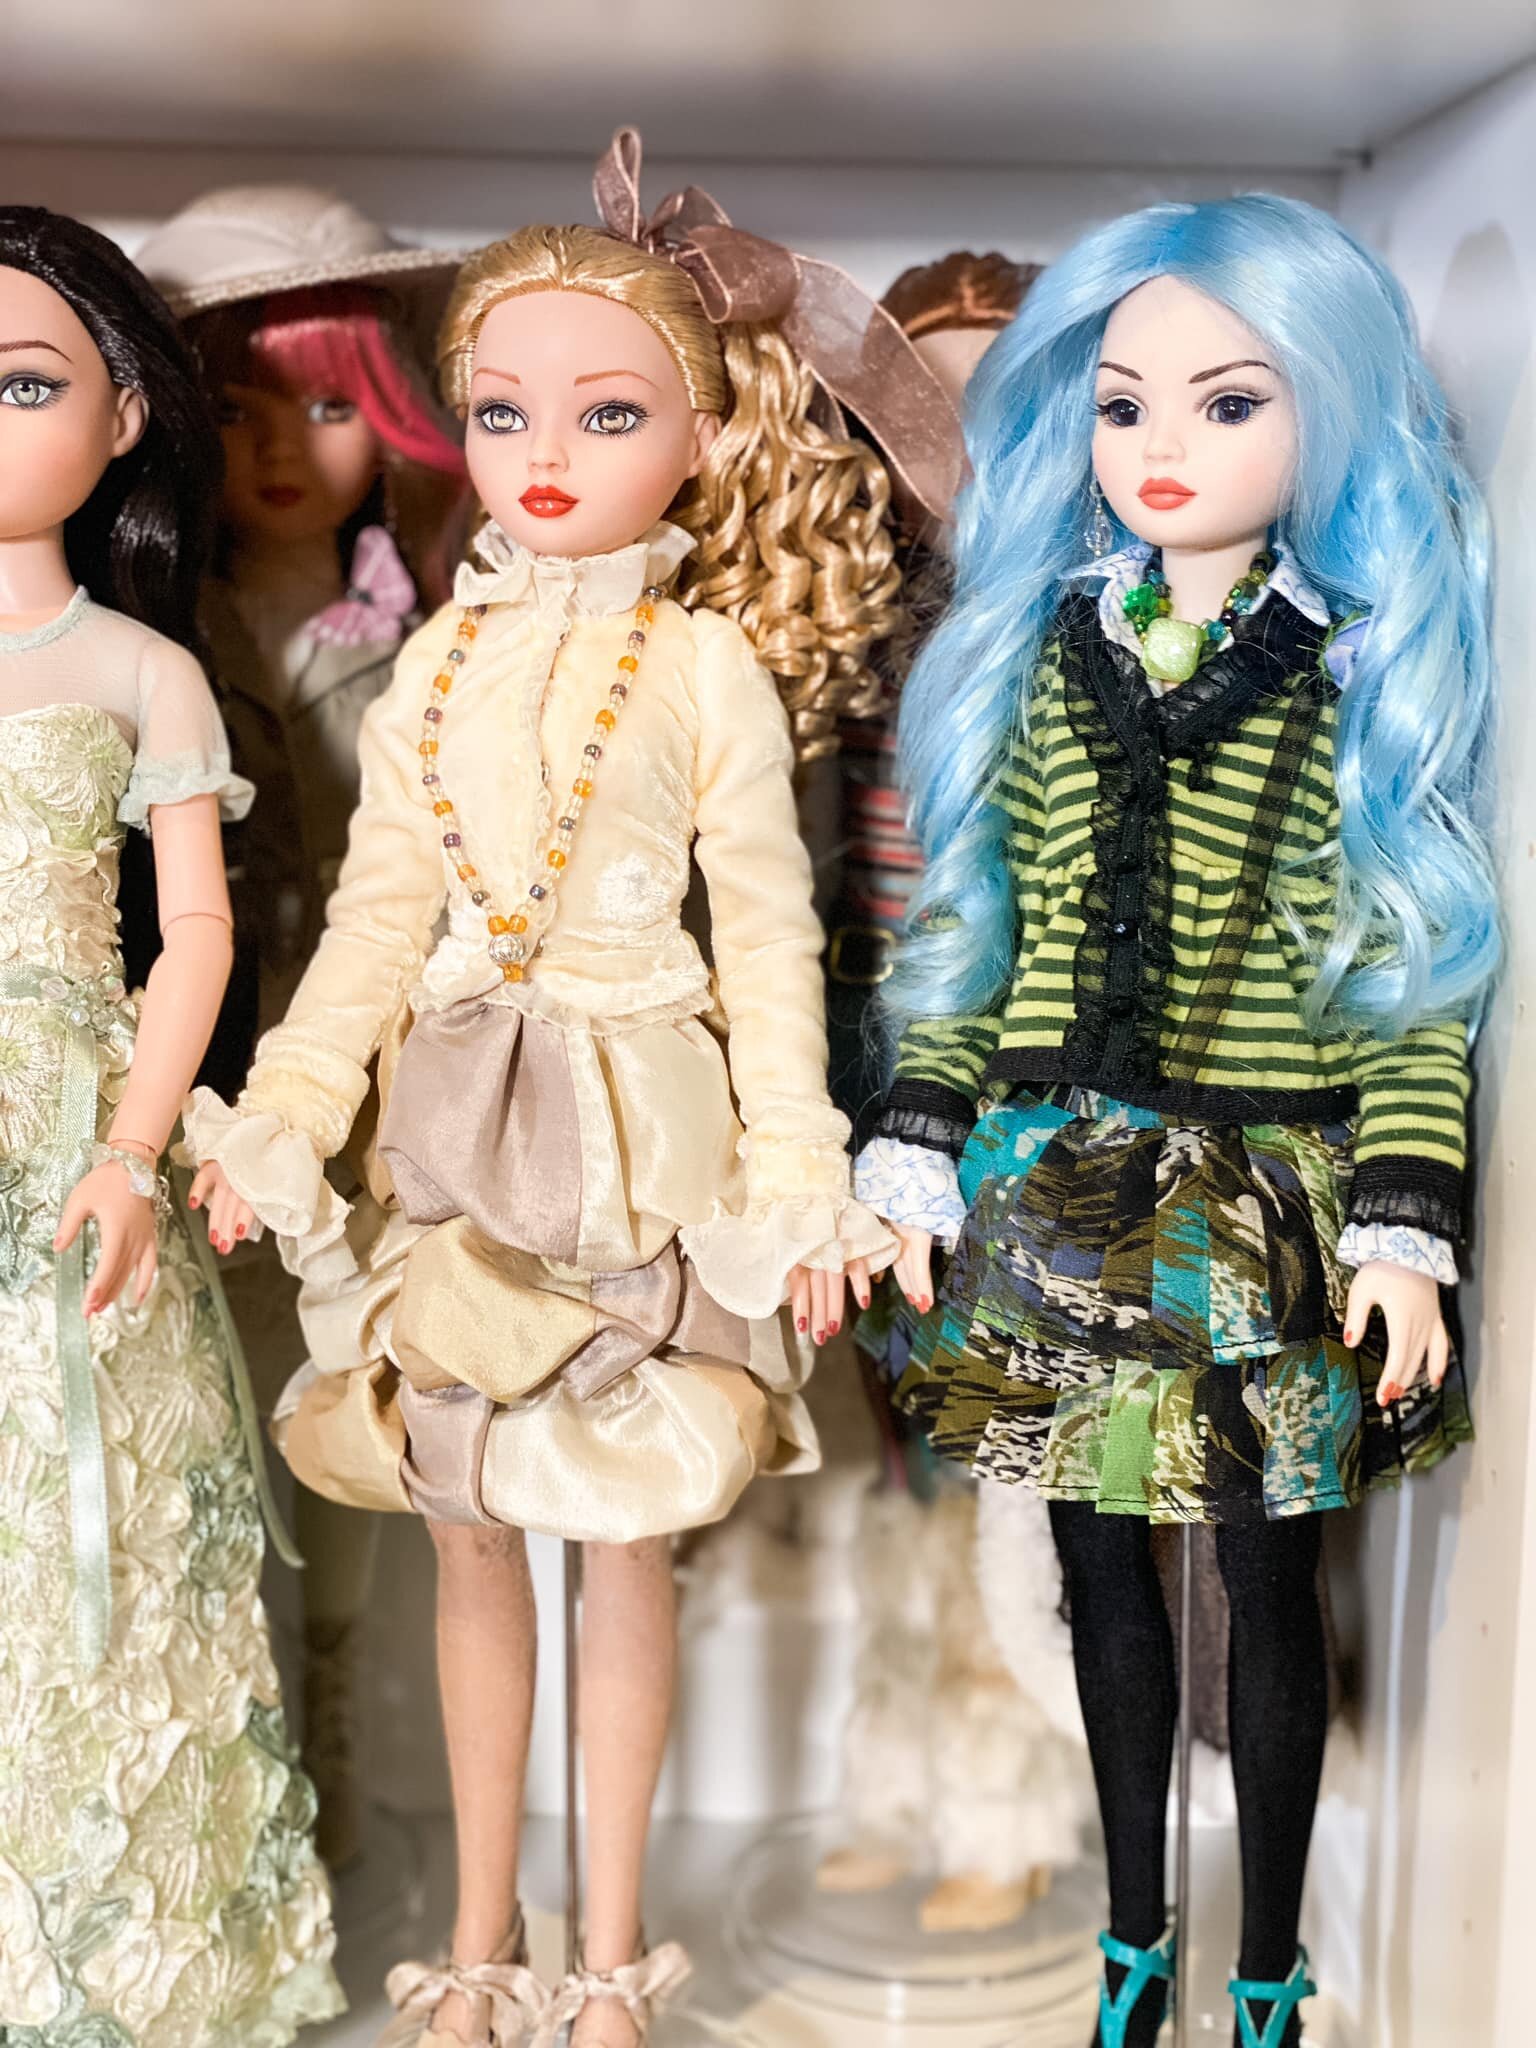 Nicole Randall Virtual Doll Convention Doll Collection4.jpg